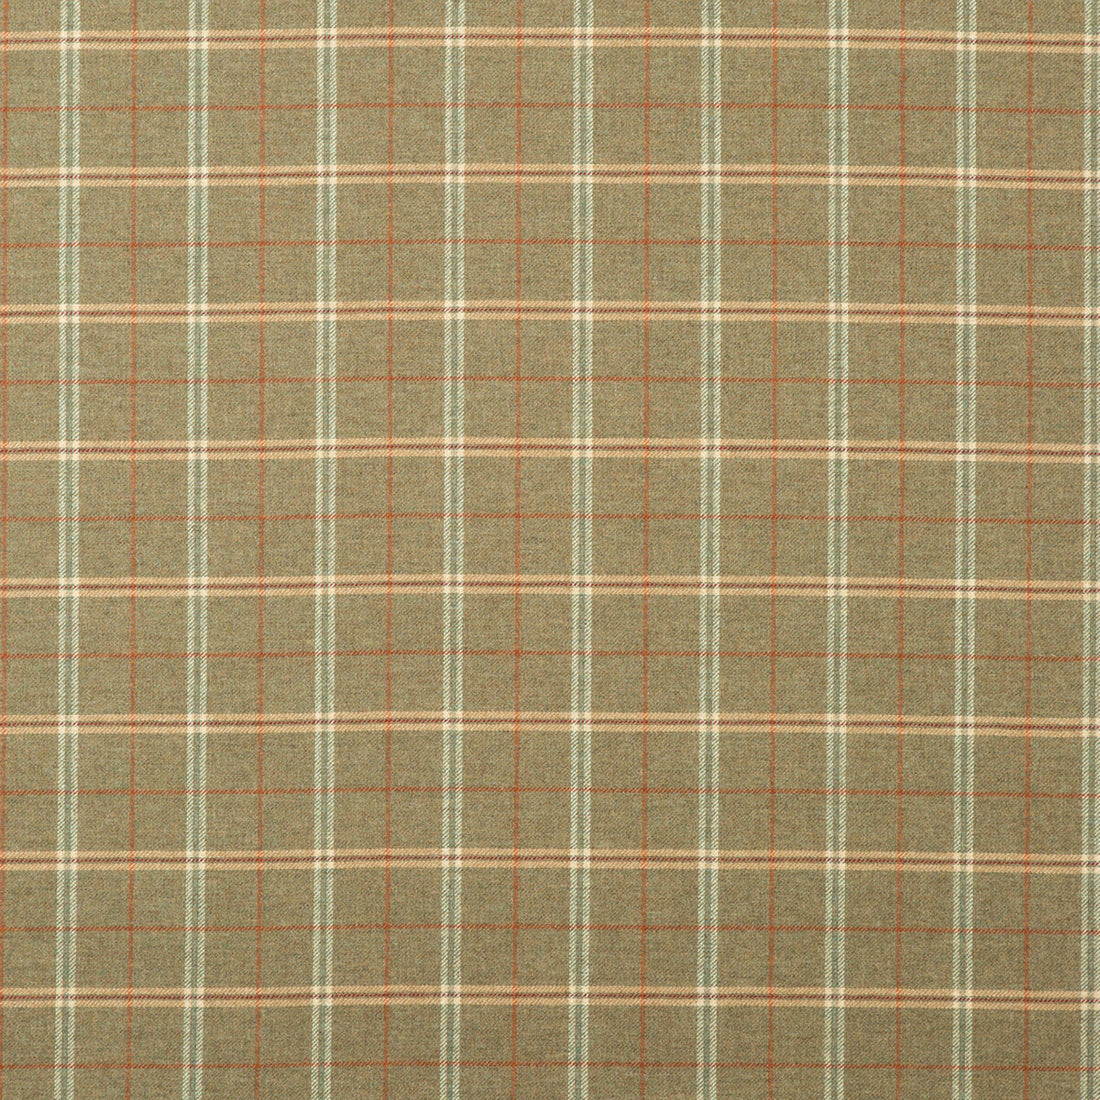 Islay fabric in lovat color - pattern FD700.R106.0 - by Mulberry in the Bohemian Romance collection